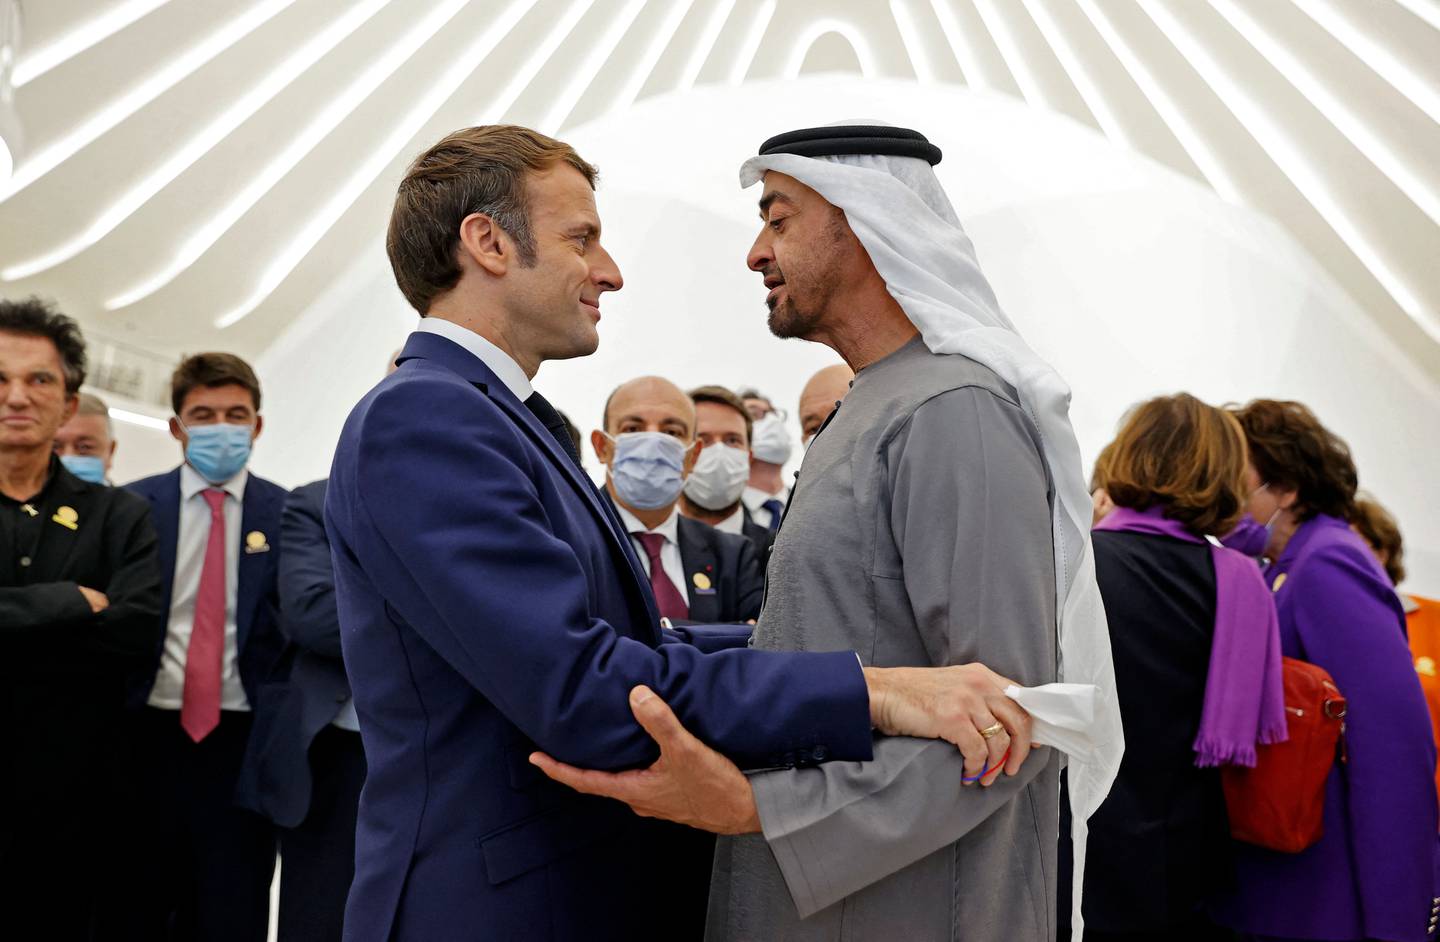 Sheikh Mohamed bin Zayed, Crown Prince of Abu Dhabi and Deputy Supreme Commander of the Armed Forces, greets French President Emmanuel Macron at Expo 2020 Dubai in December. AFP